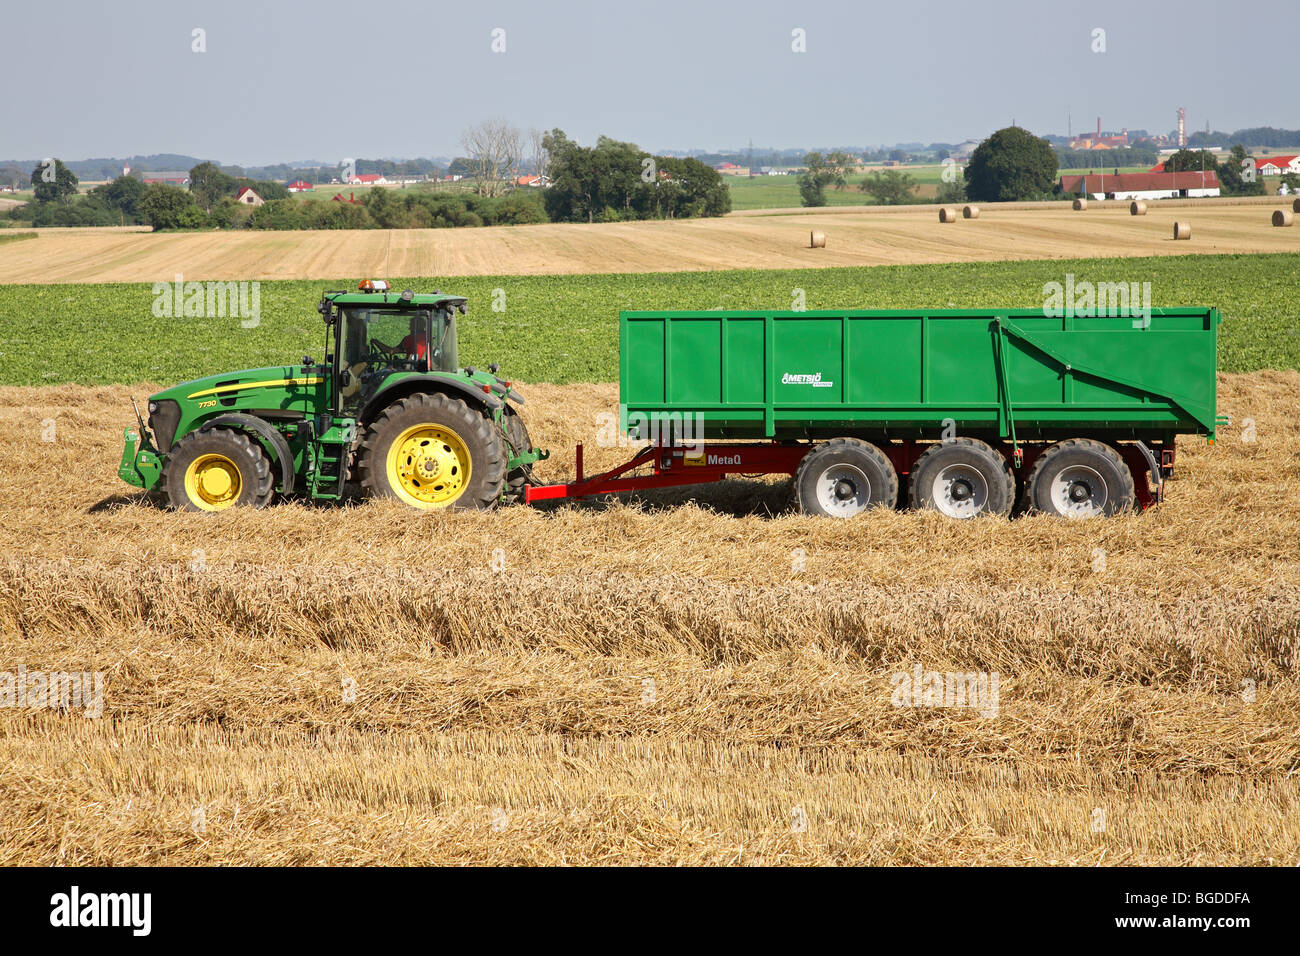 Tractor with trailer awaiting a load of wheat from a nearby combine during harvesting. South Sweden, Scandinavia. Stock Photo